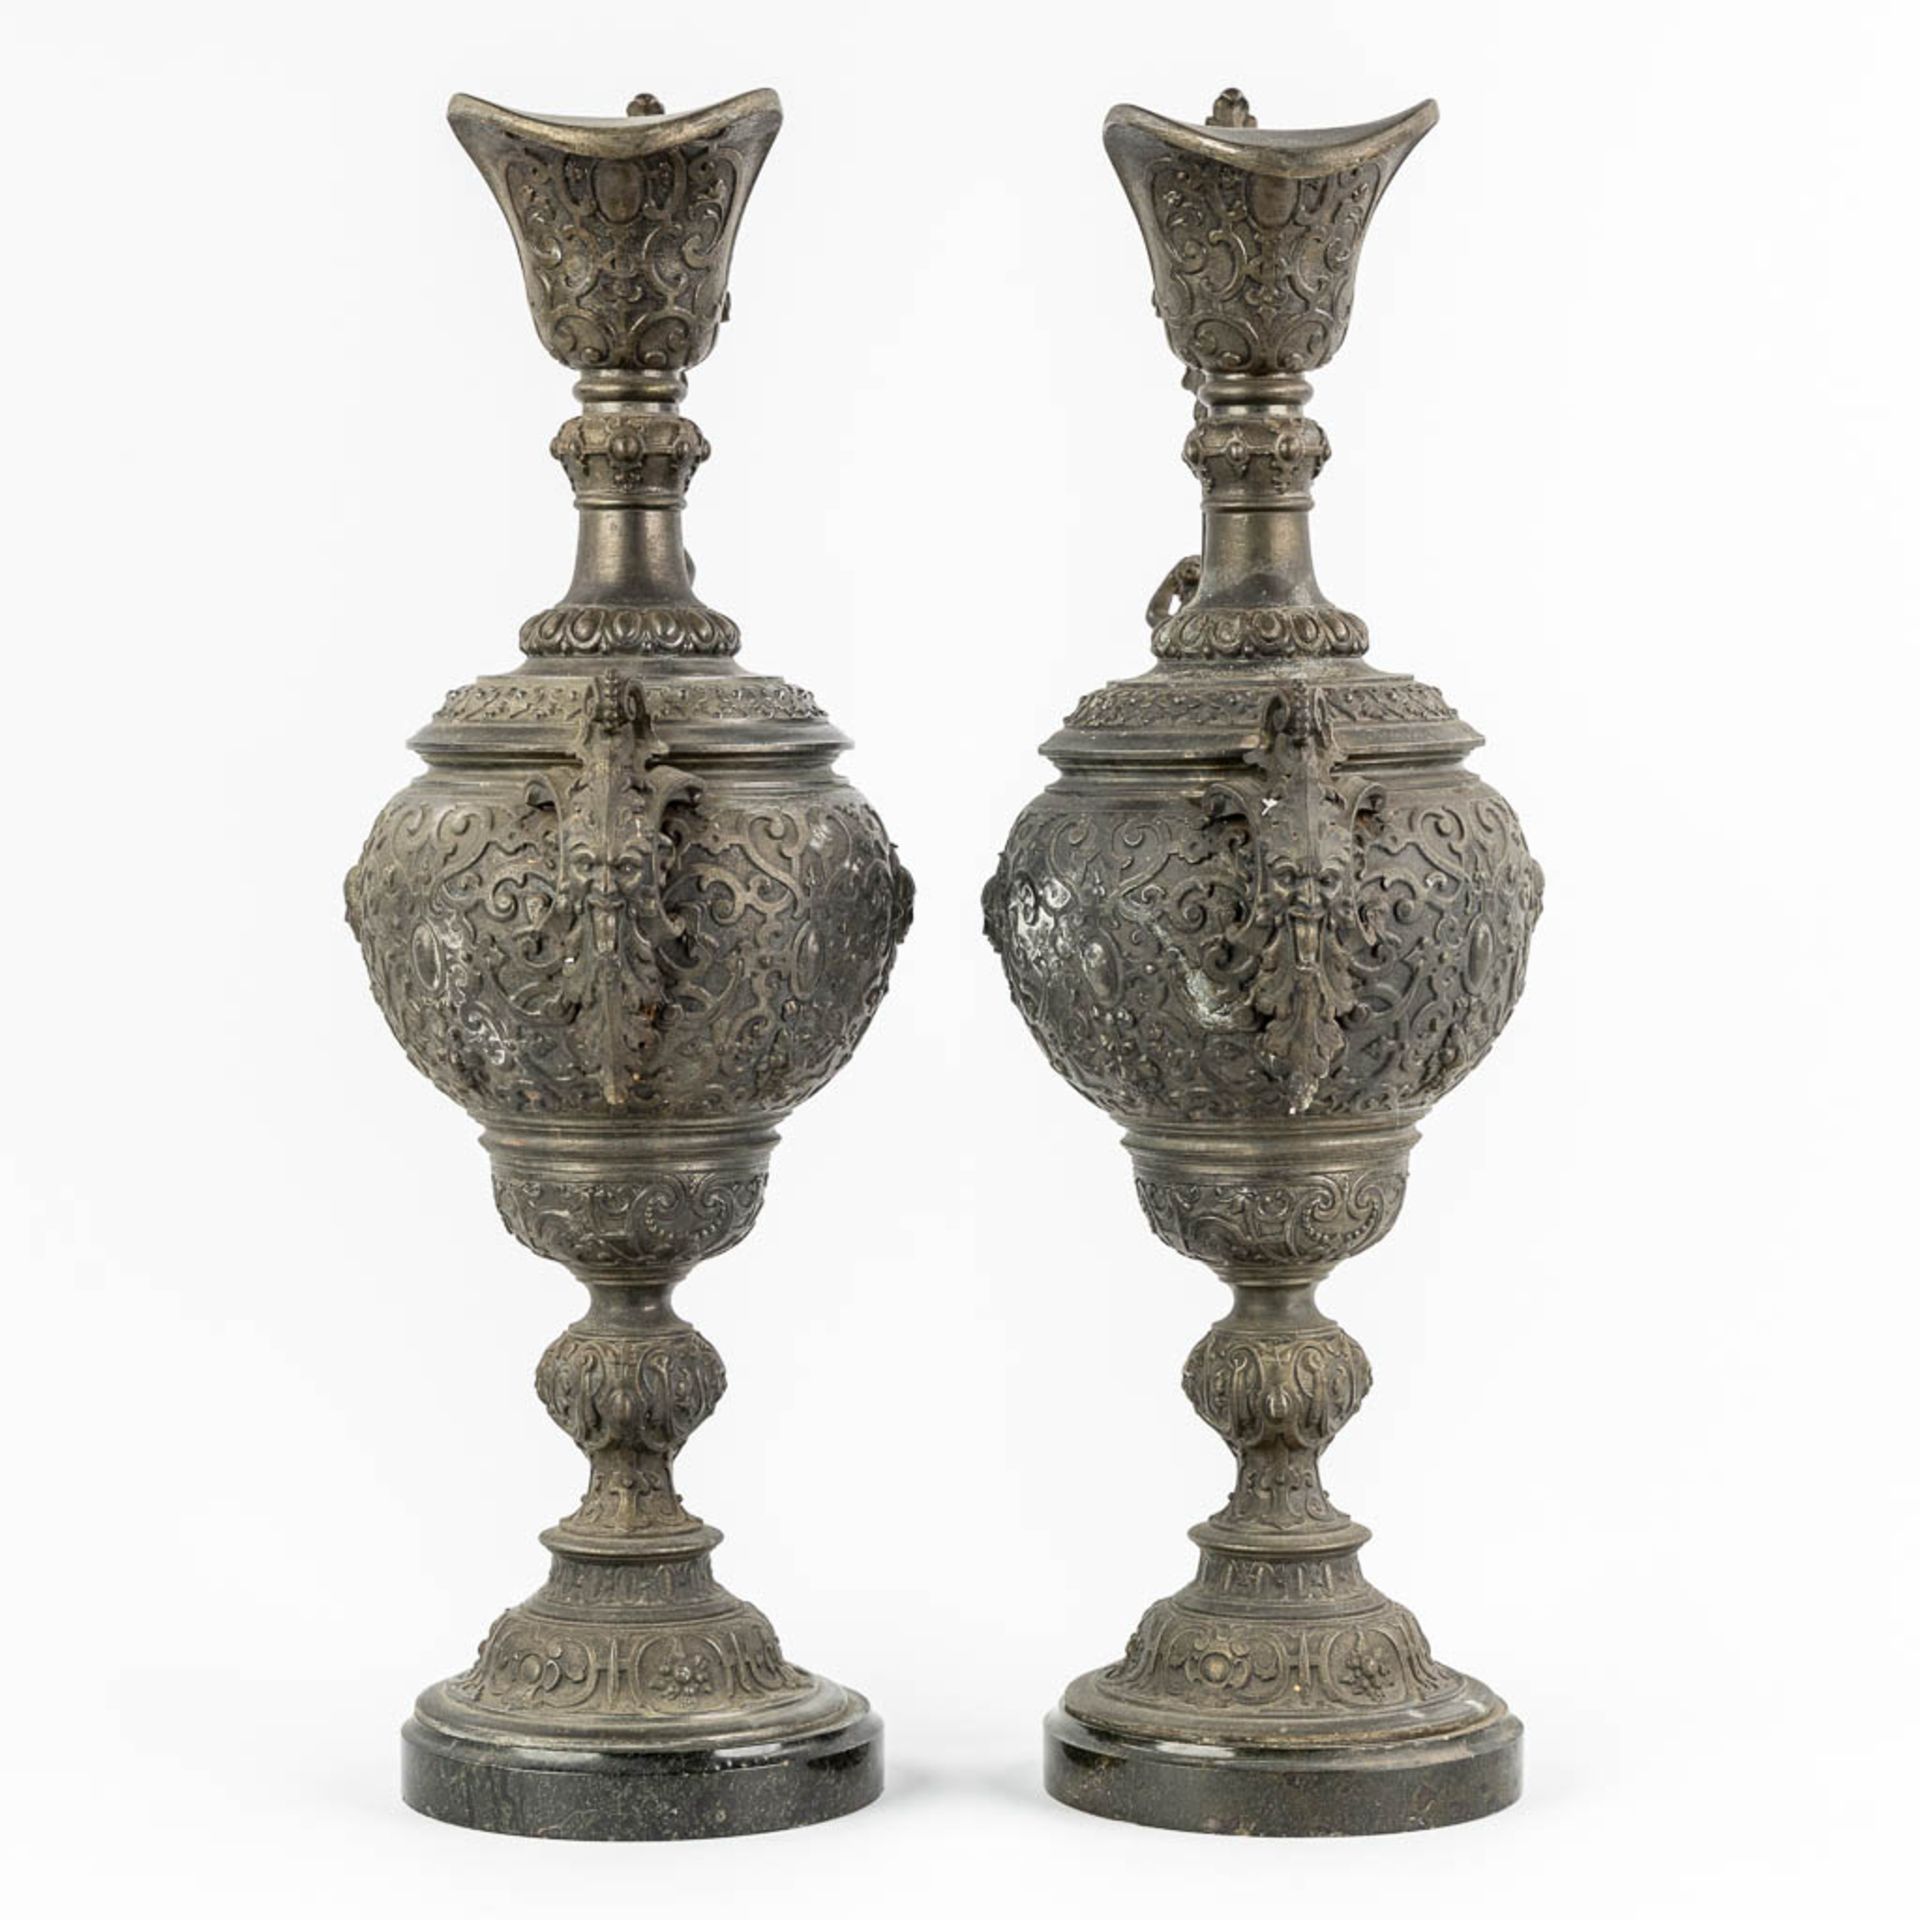 A pair of decorative pitchers, spelter on a marble base. Circa 1900. (L:18 x W:23 x H:56 cm) - Image 6 of 14